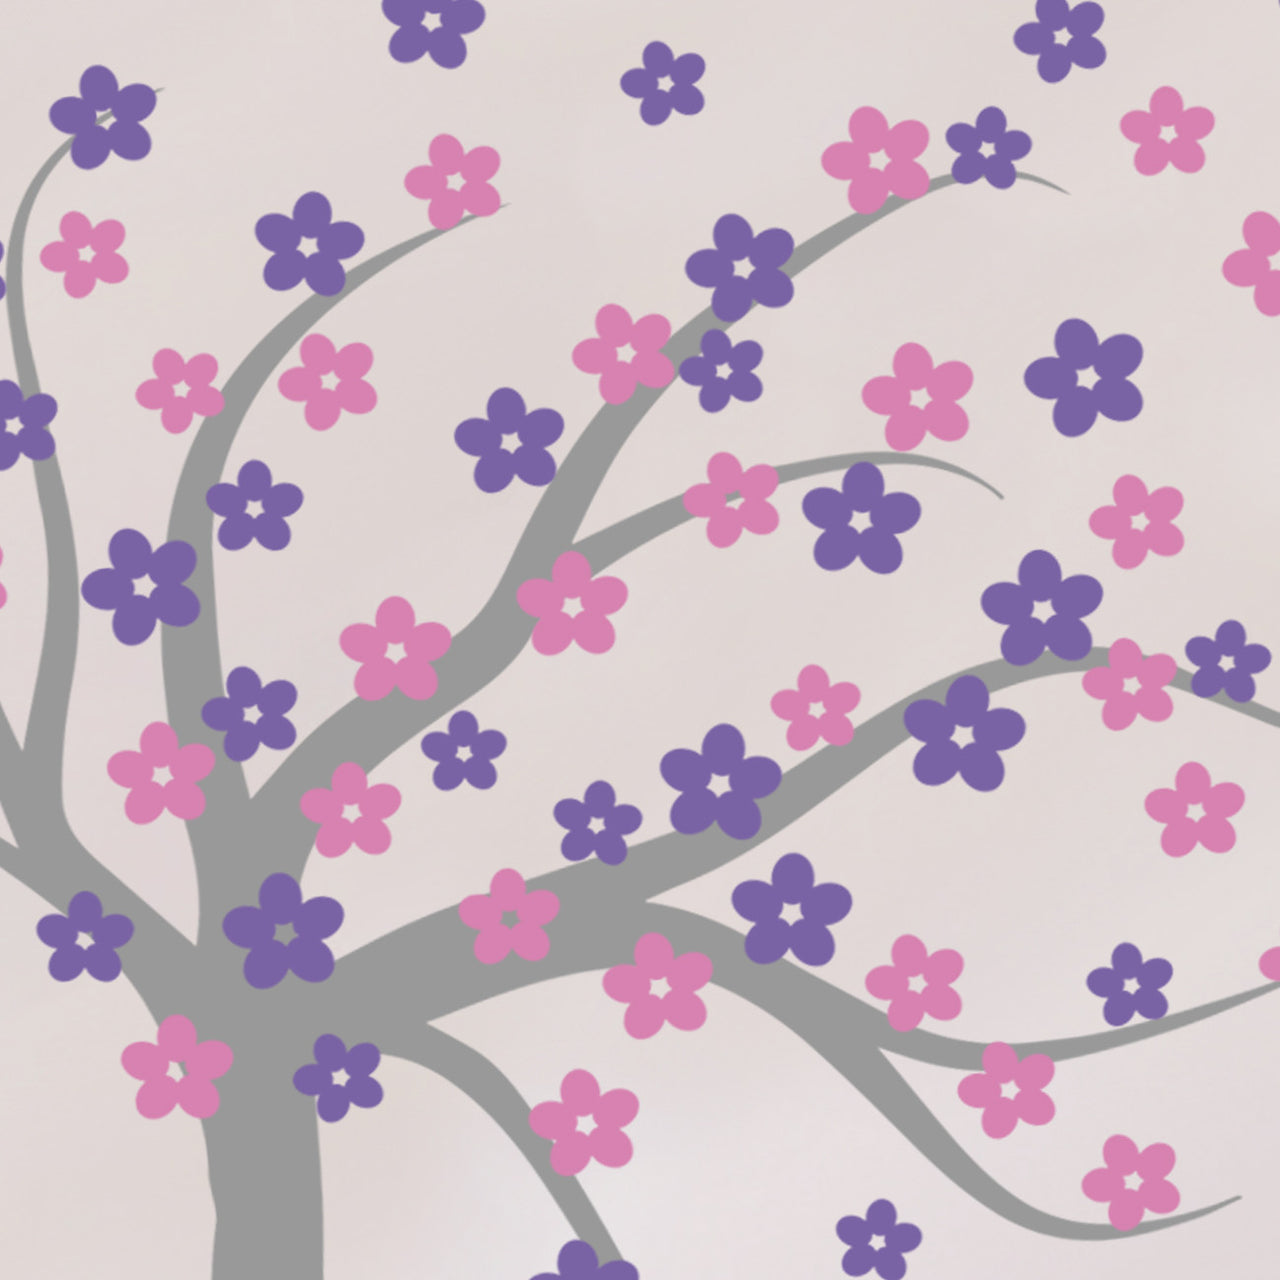 Blossom Tree Wall Decal